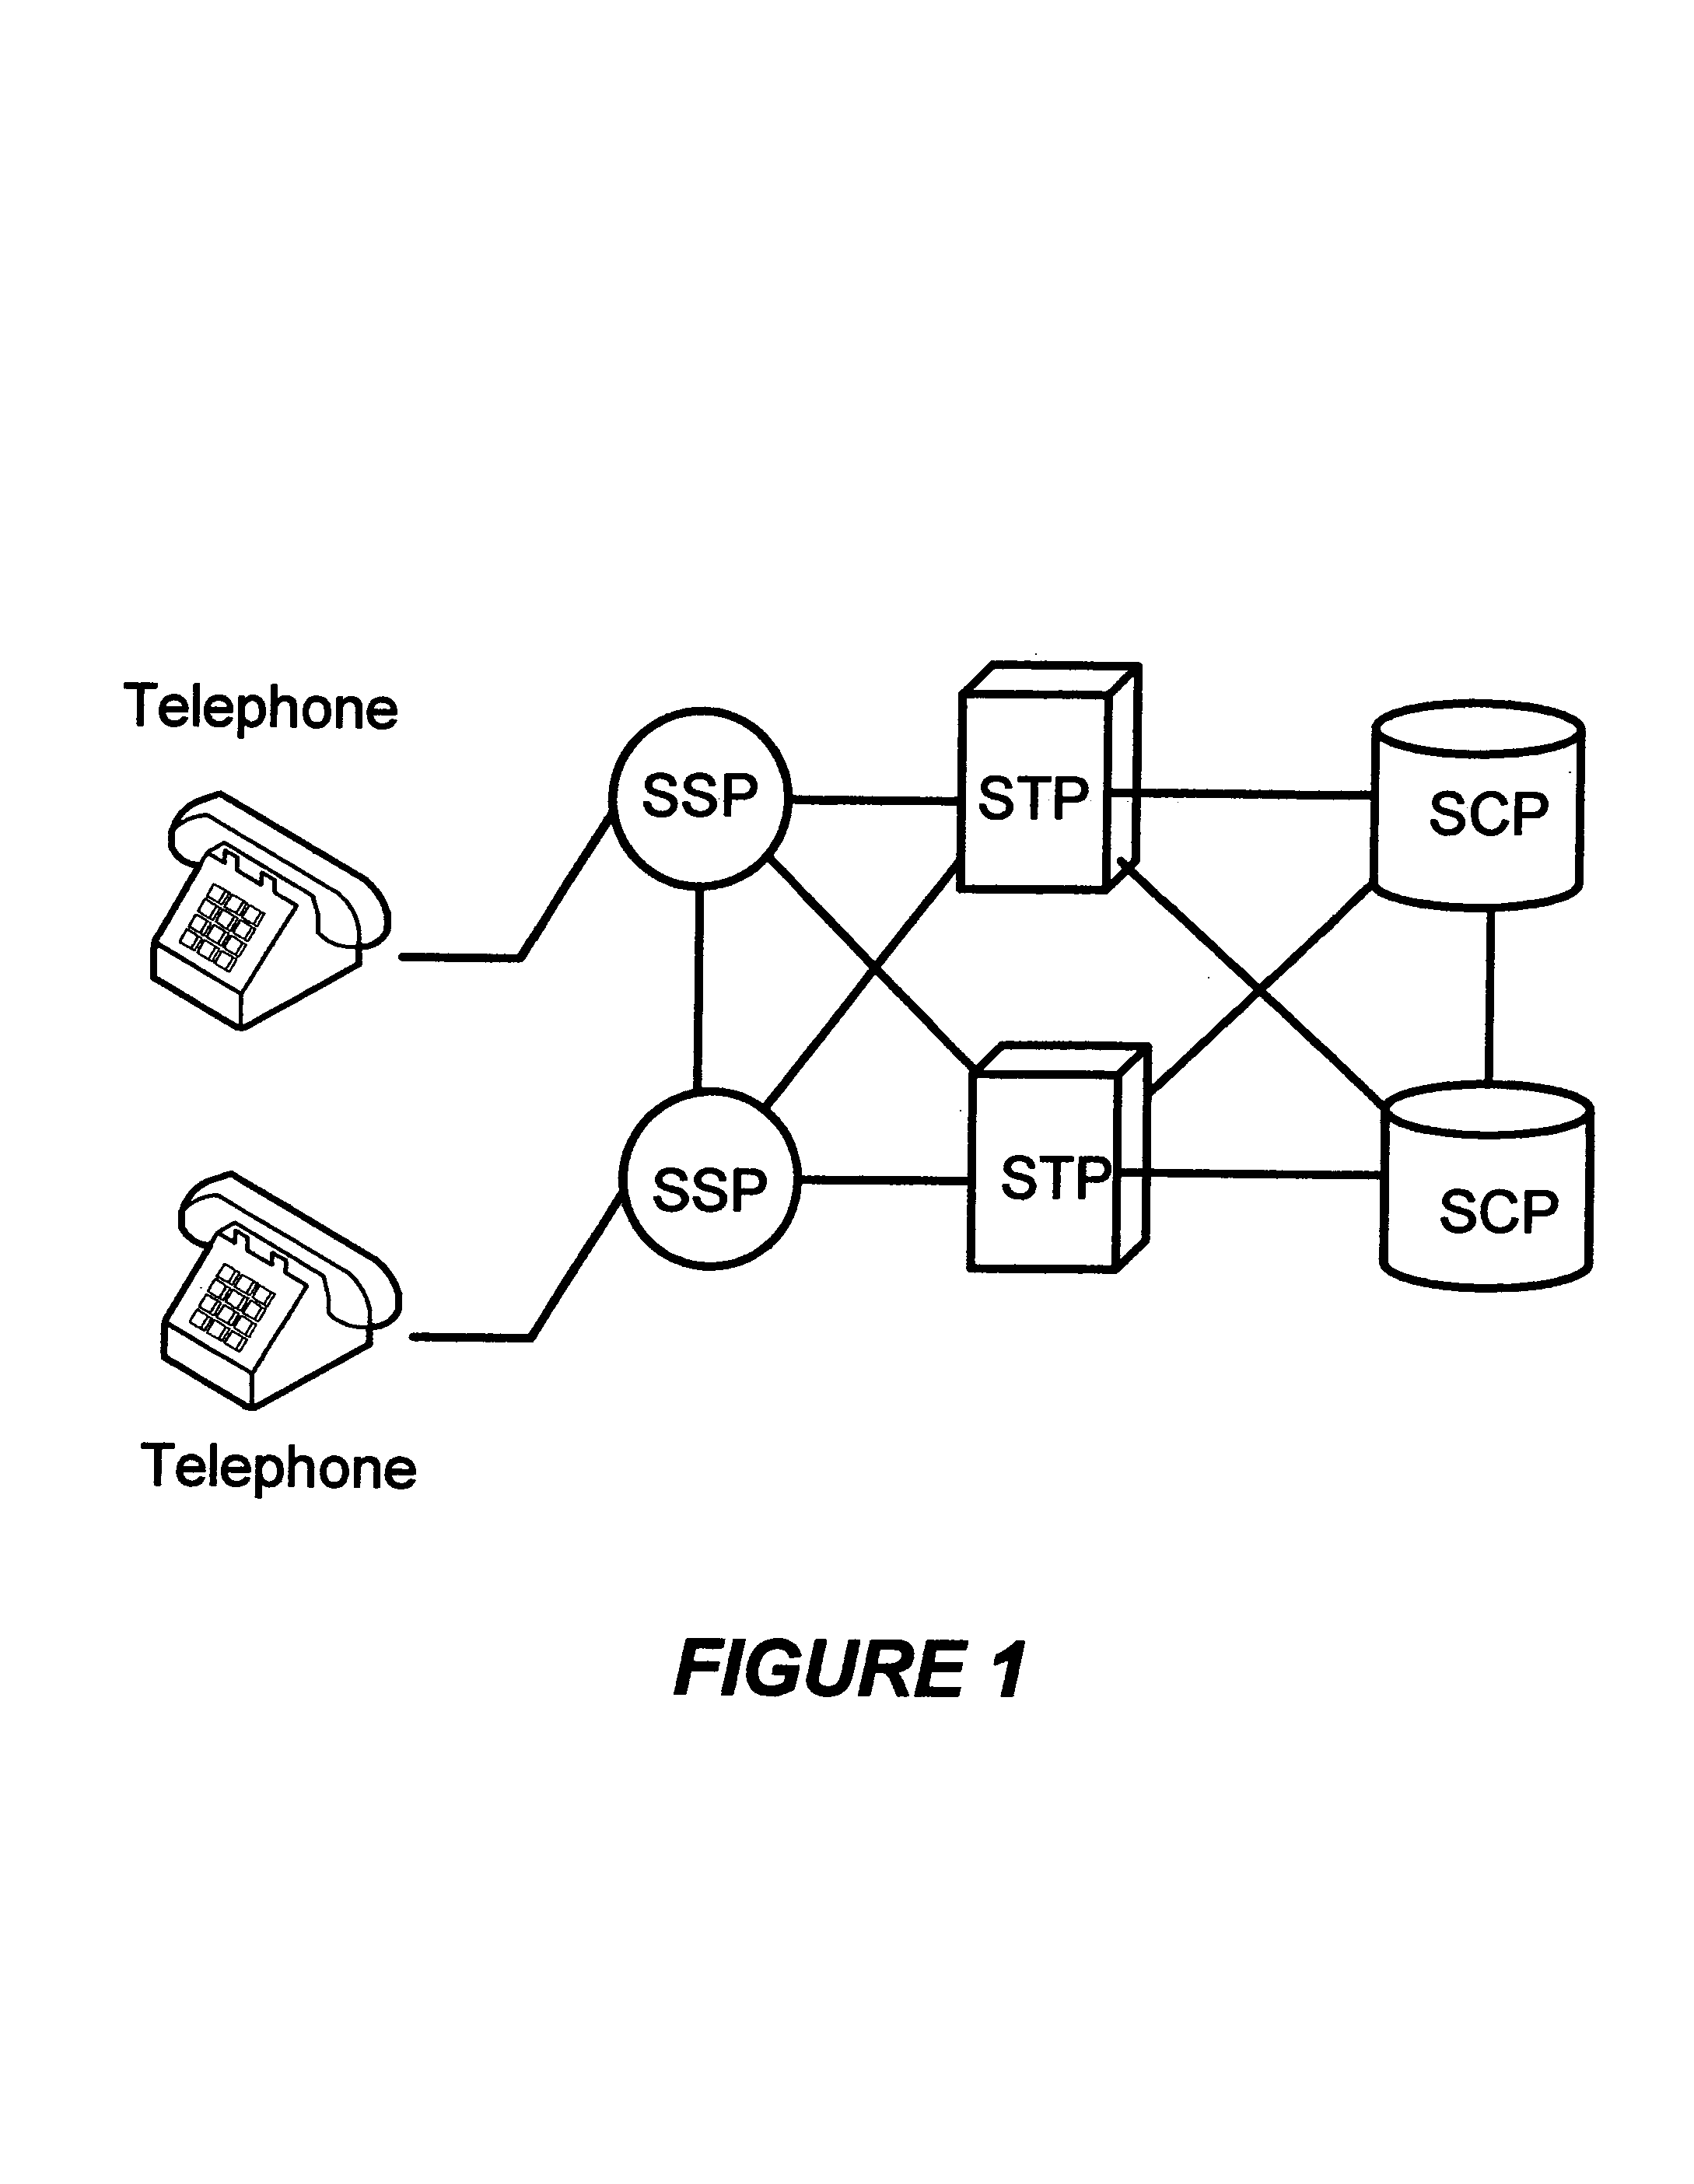 Real time call trace capable of use with multiple elements